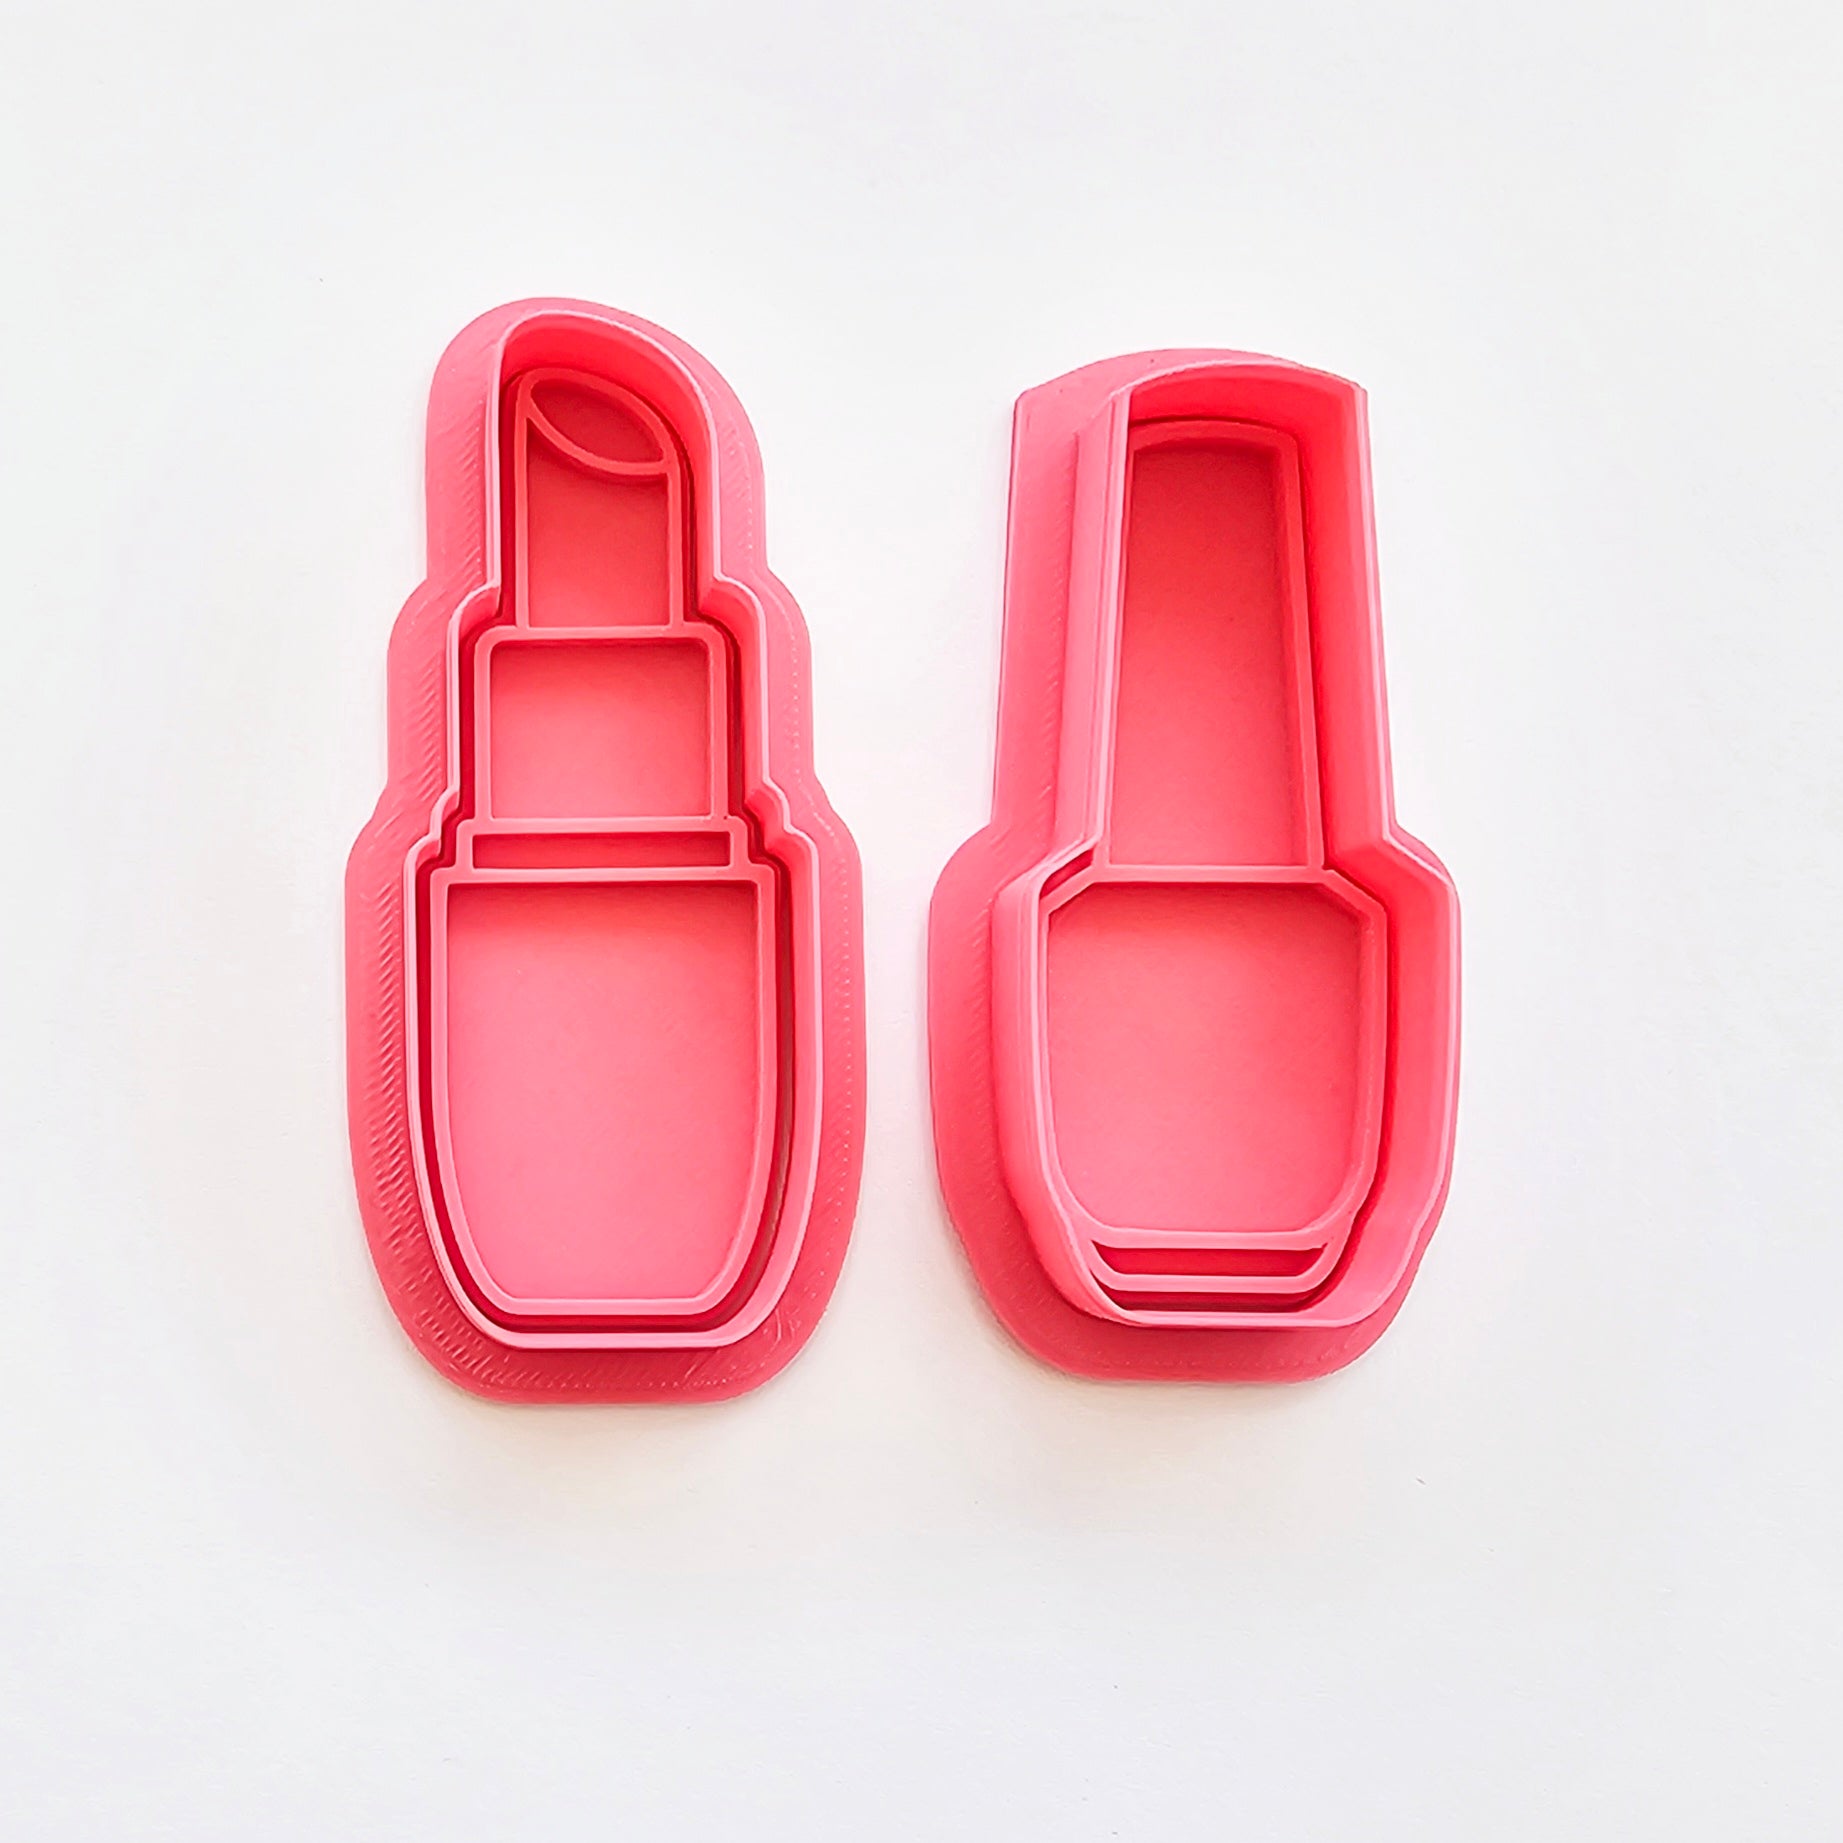 Nail Polish and Lipstick Cookie Cutter Set